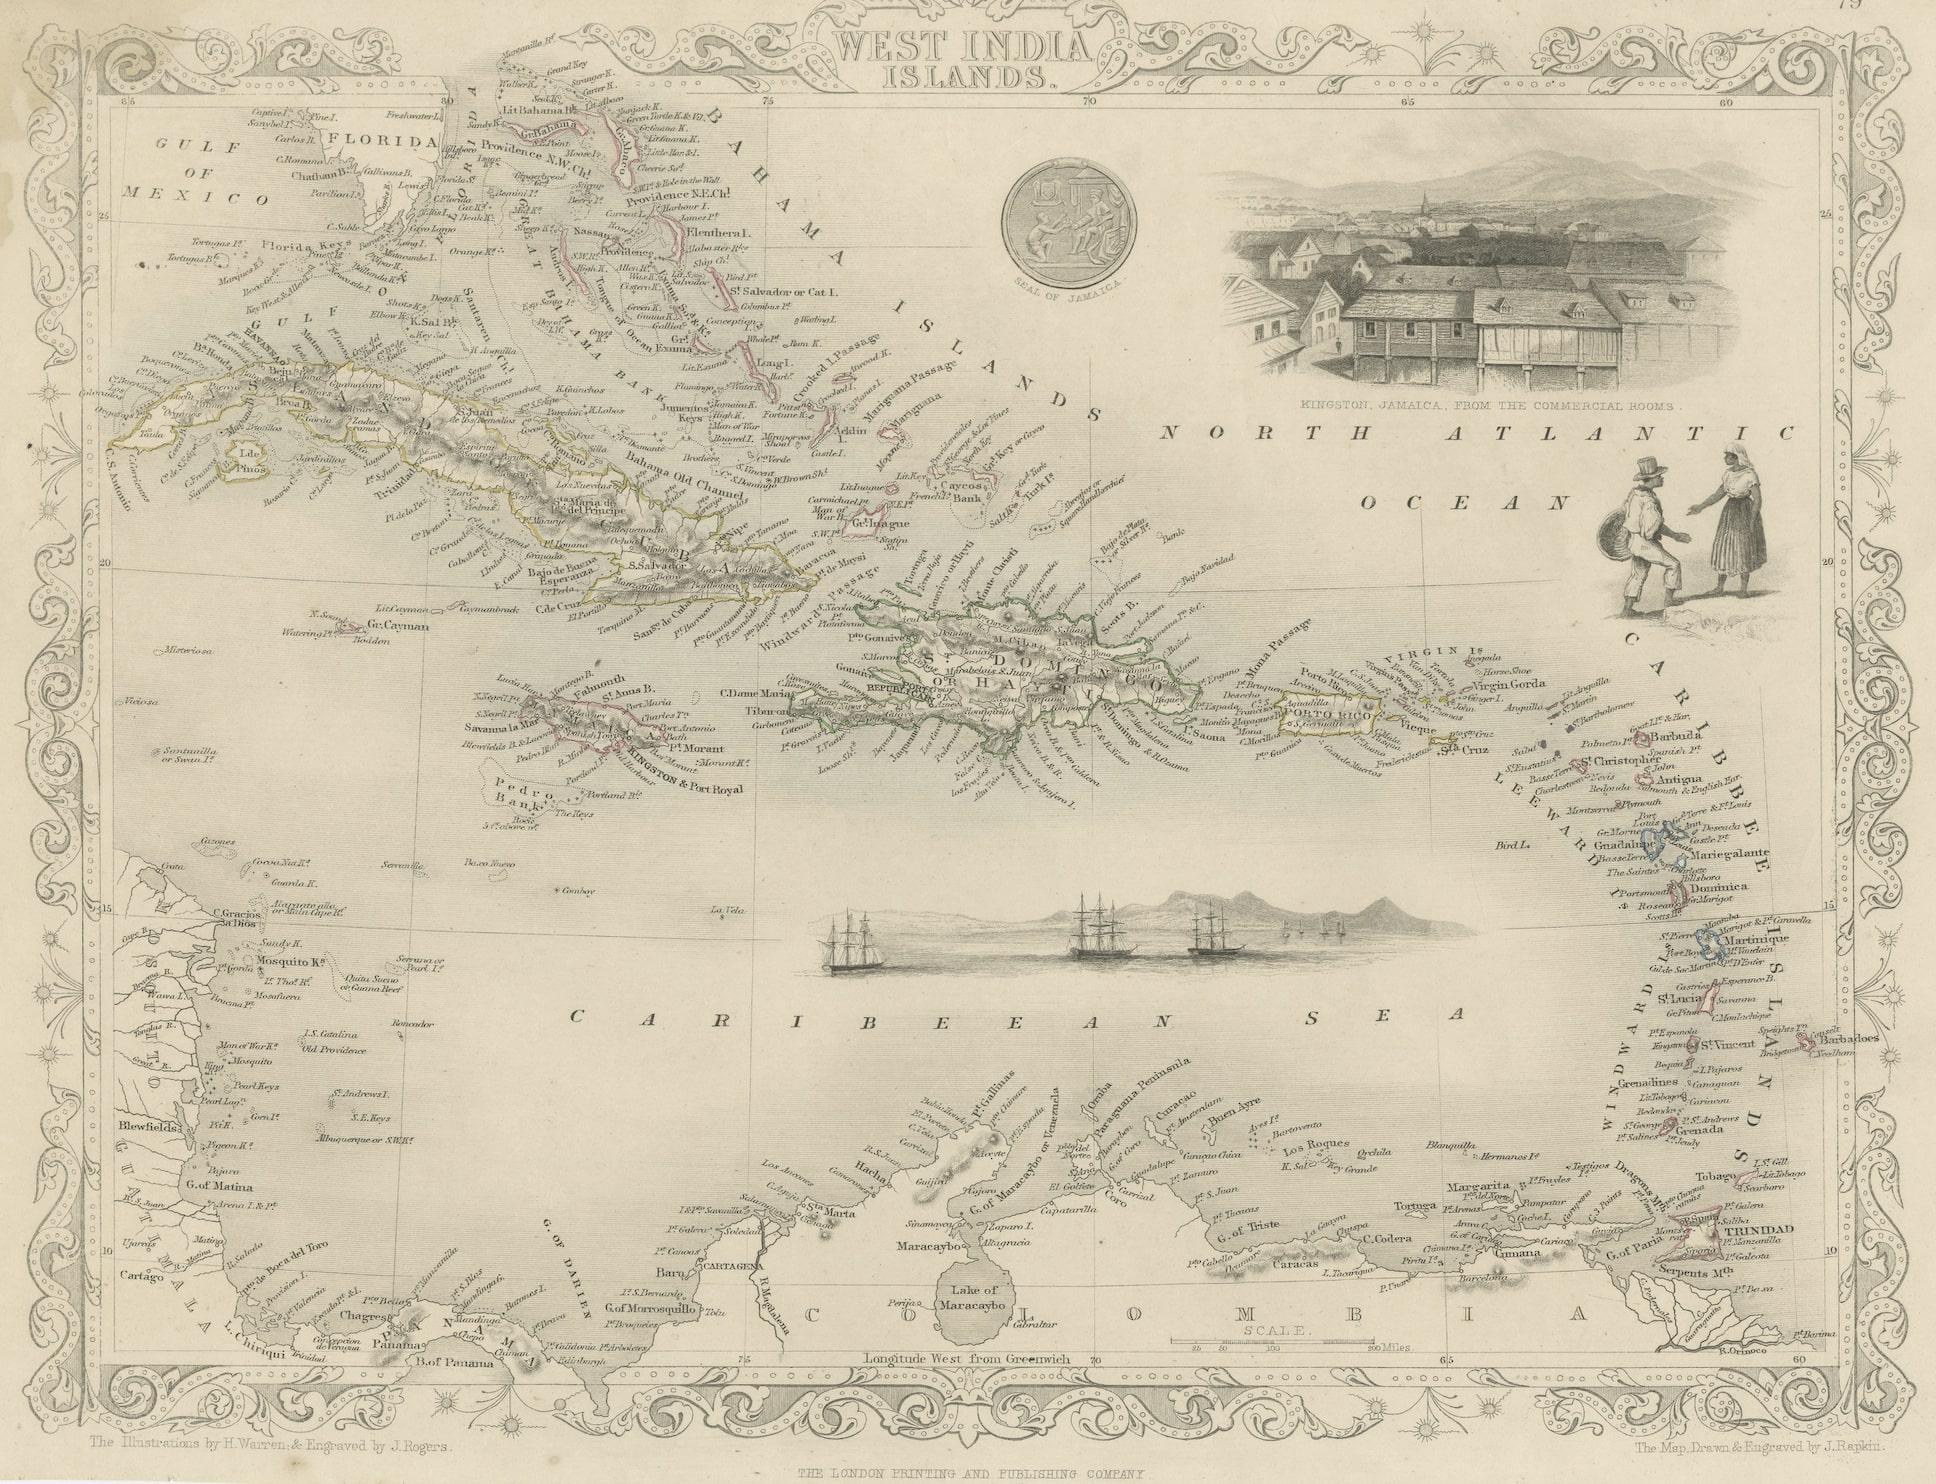 John Tallis' 1851 map of the West Indies stands as a striking example of his renowned cartographic work. With meticulous detail and artistic embellishments, this map offers a comprehensive view of the Caribbean region during the mid-19th